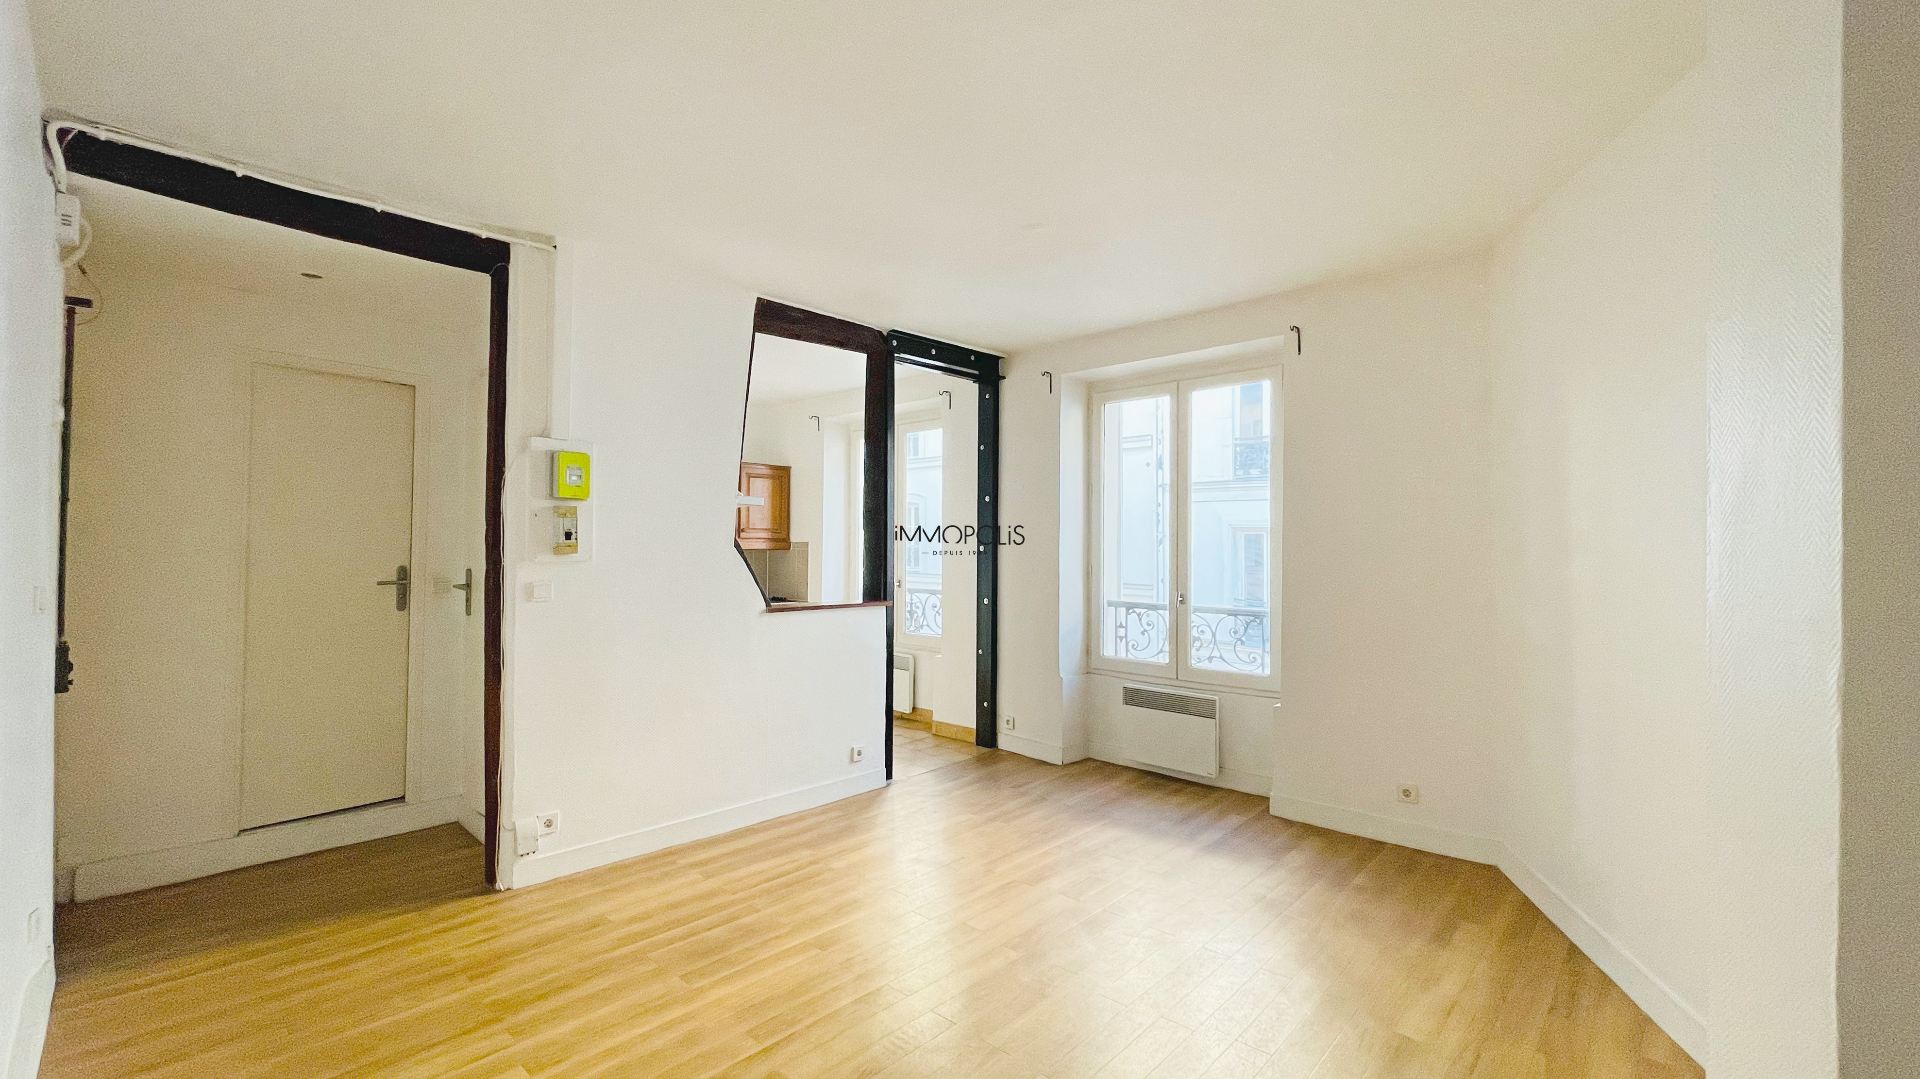 Beautiful studio in Montmartre, 30 m² without loss of space located in a swallowed building 1